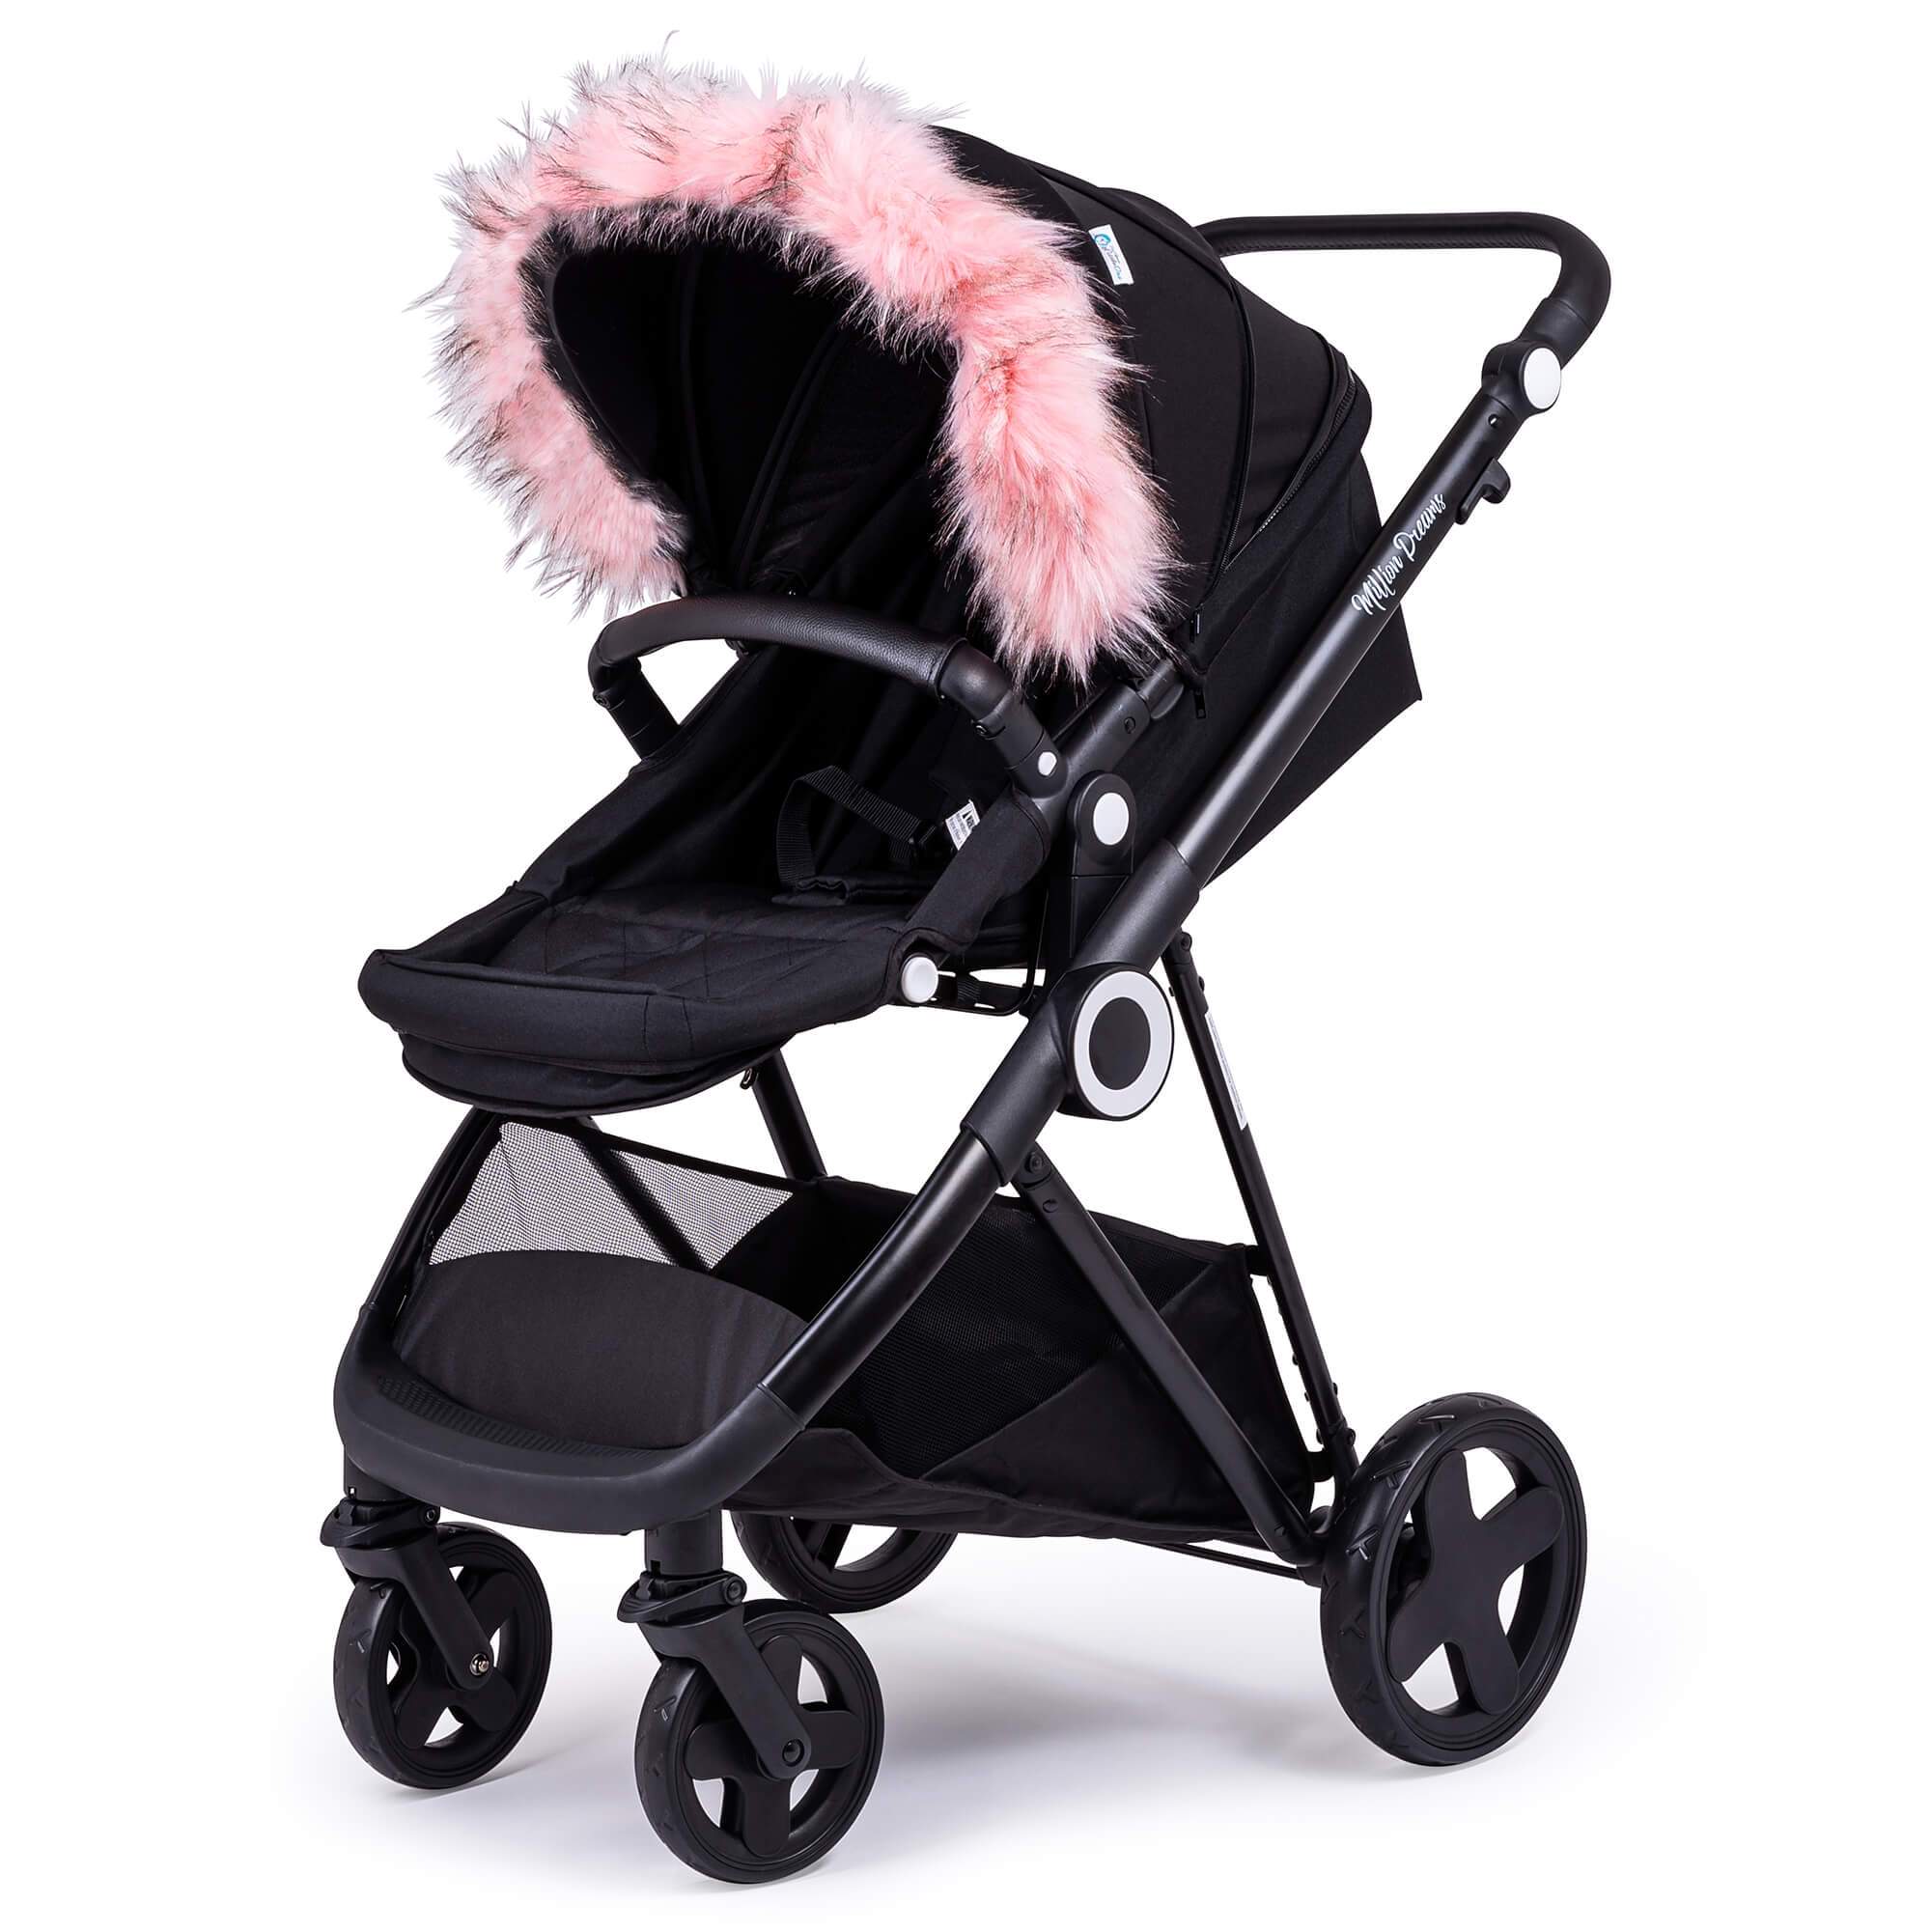 Pram Fur Hood Trim Attachment for Pushchair Compatible with Greentom - Light Pink / Fits All Models | For Your Little One